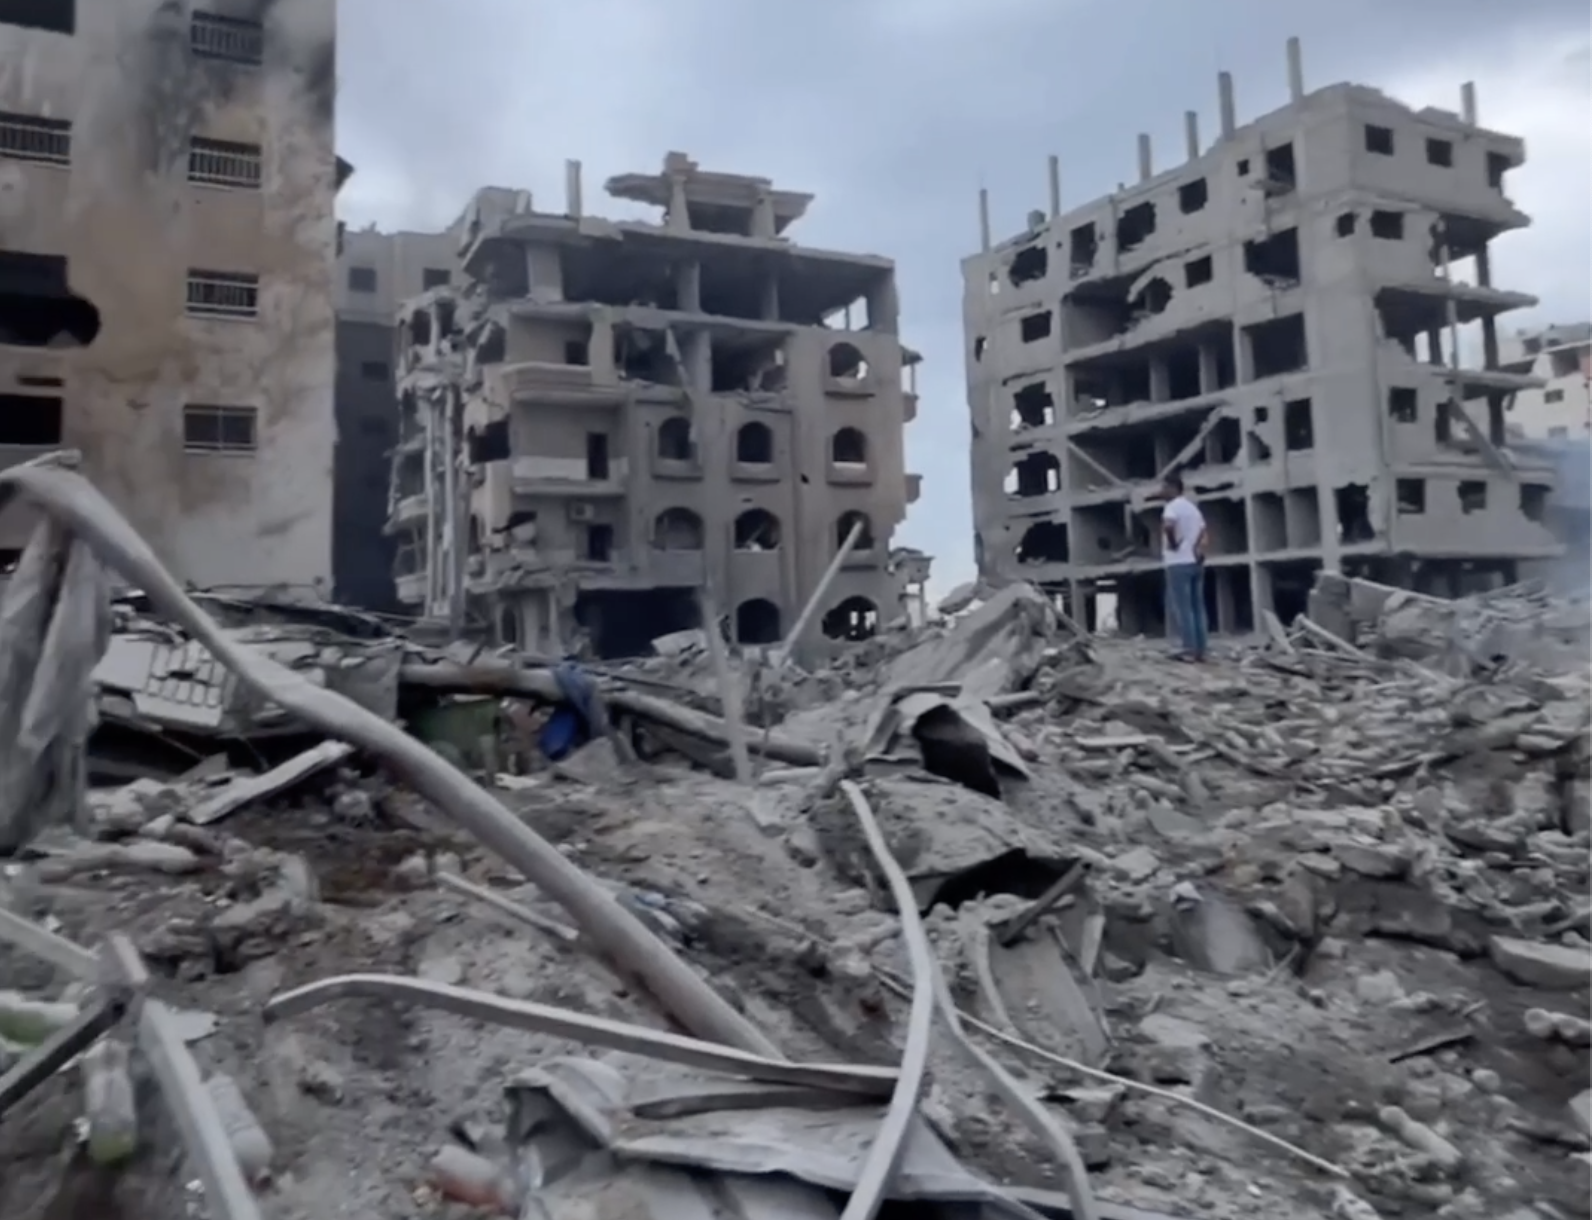 The remains of bombed buildings in Gaza